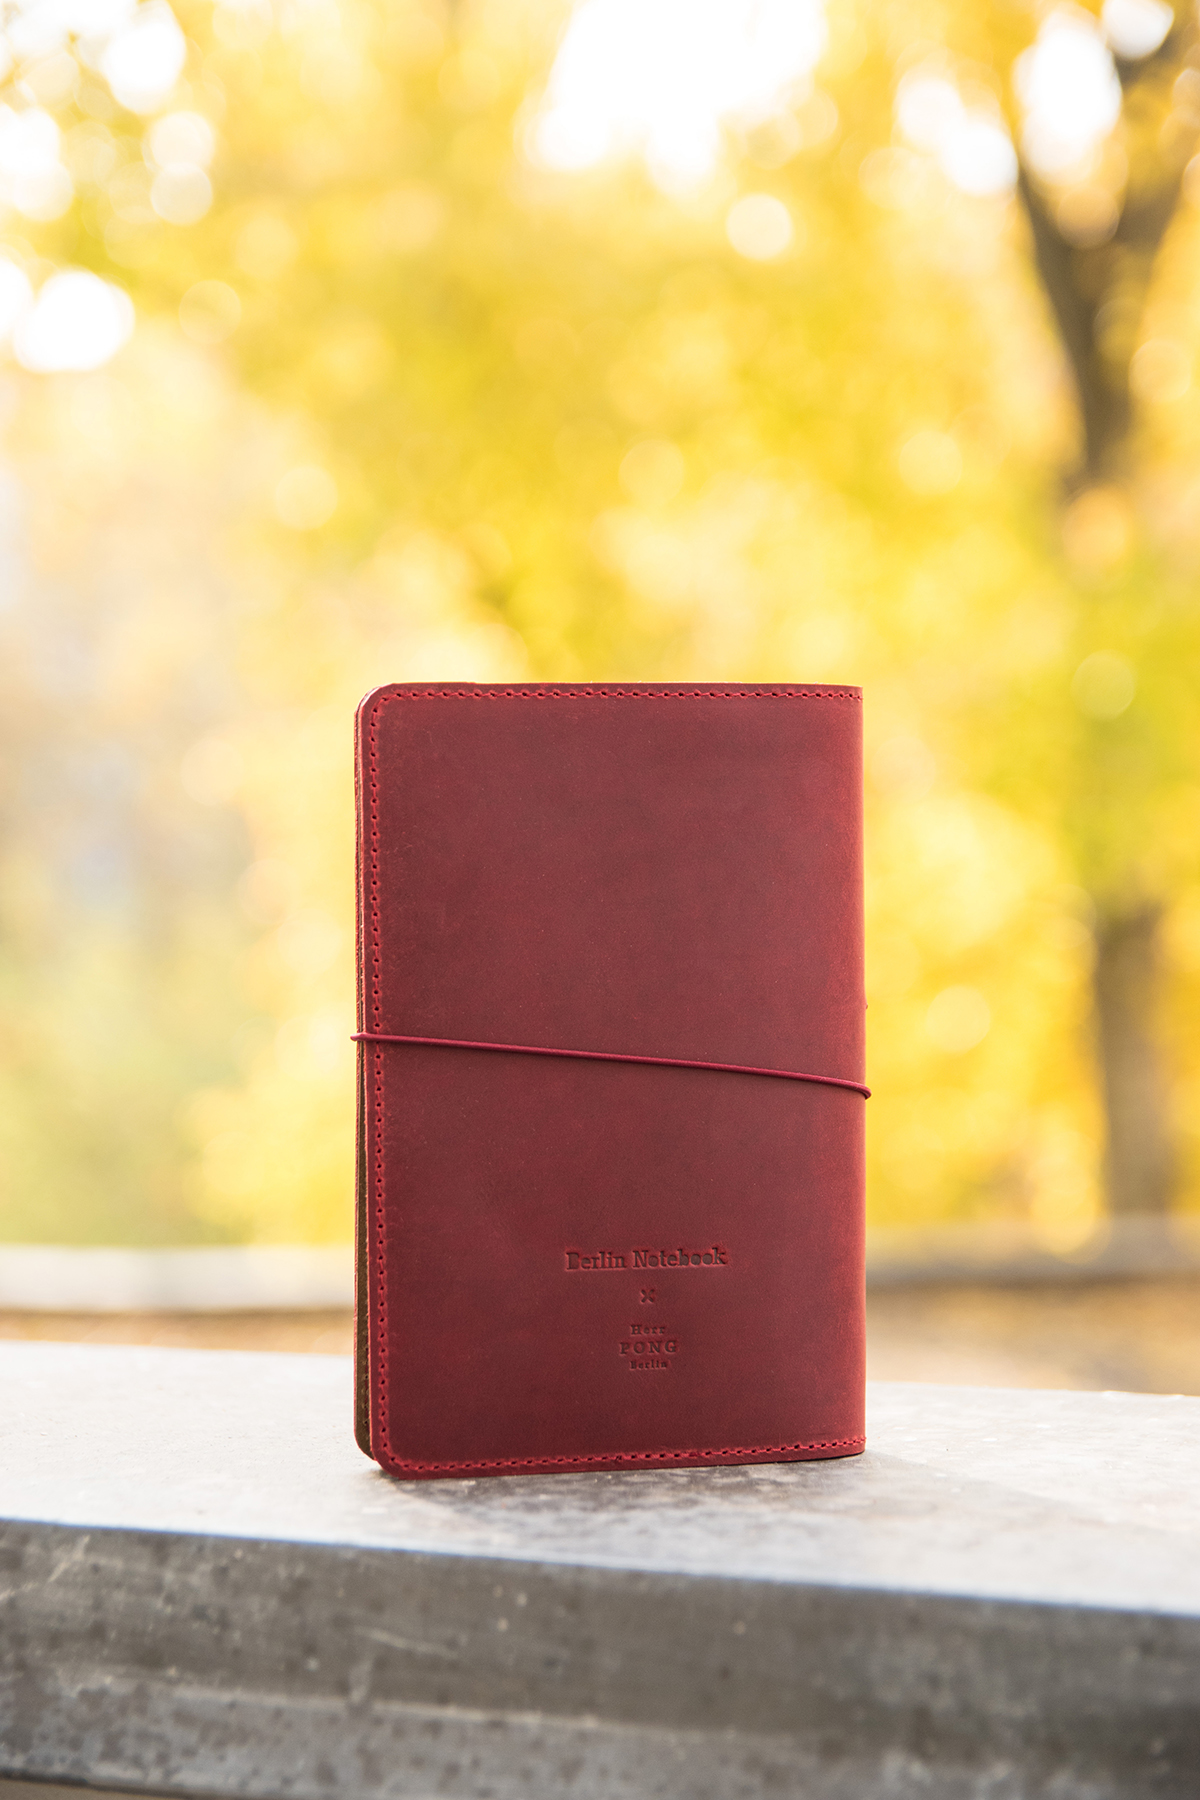 Berlin Notebook Leather Notebook Cover - Red Fire